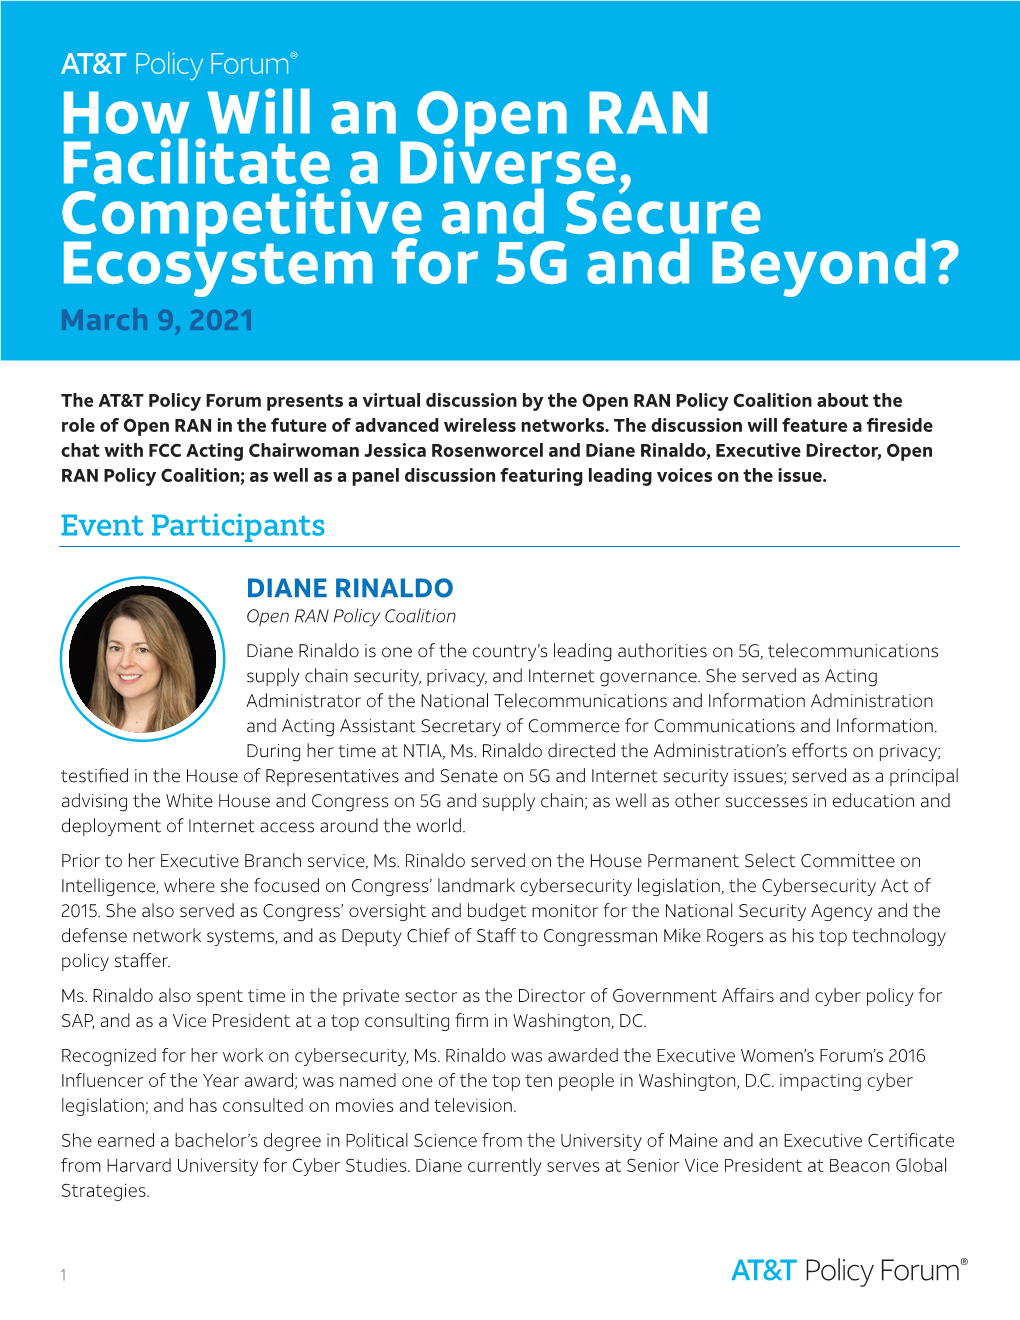 How Will an Open RAN Facilitate a Diverse, Competitive and Secure Ecosystem for 5G and Beyond? March 9, 2021